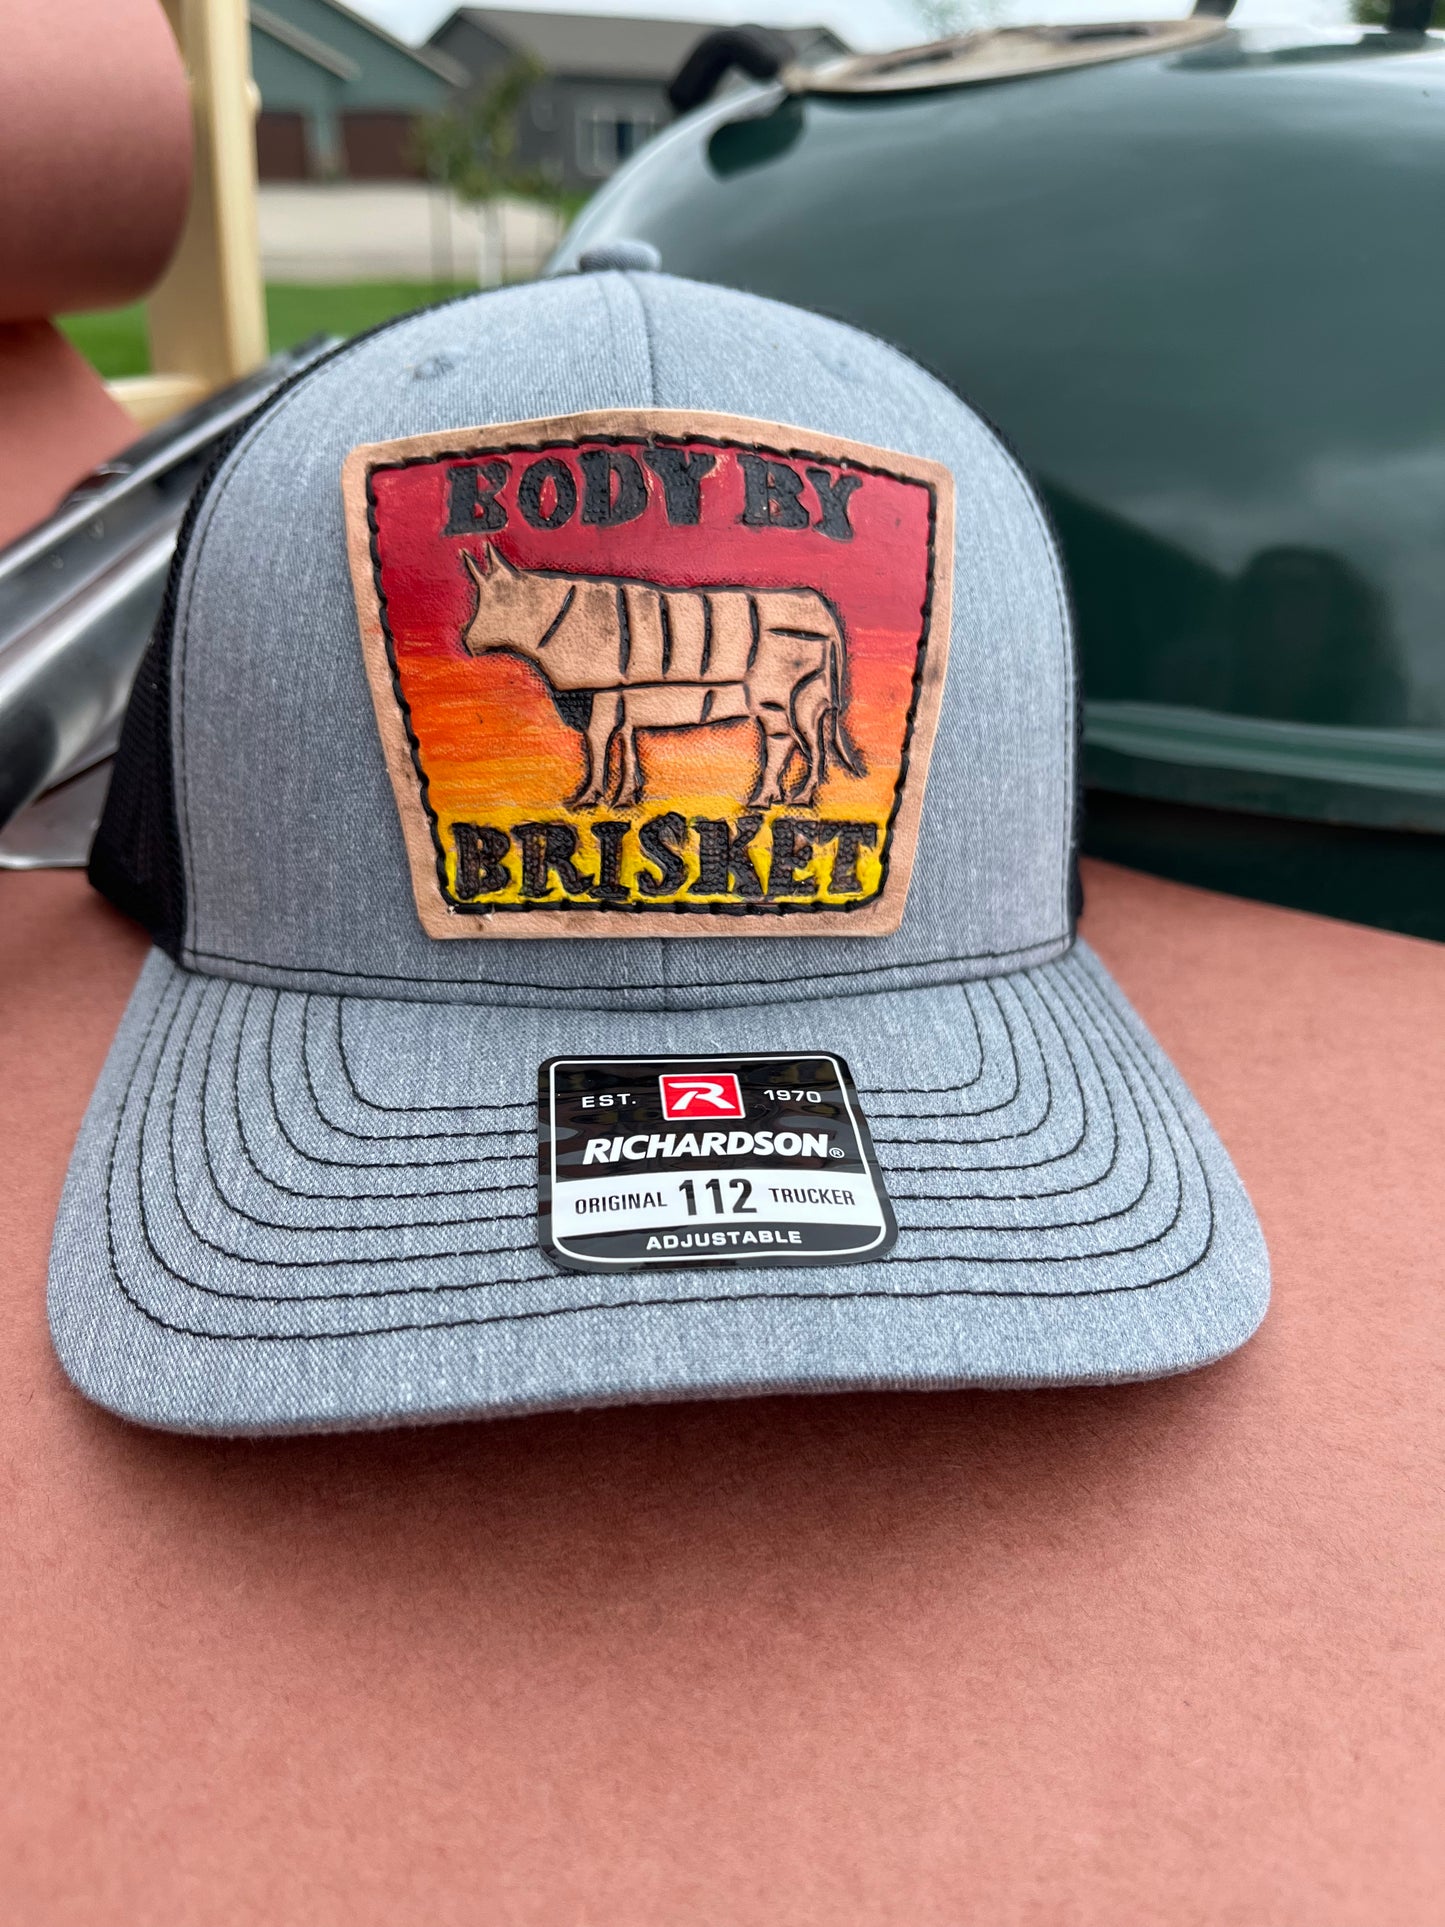 Body By Brisket BBQ Trucker Hat (painted and antiqued)